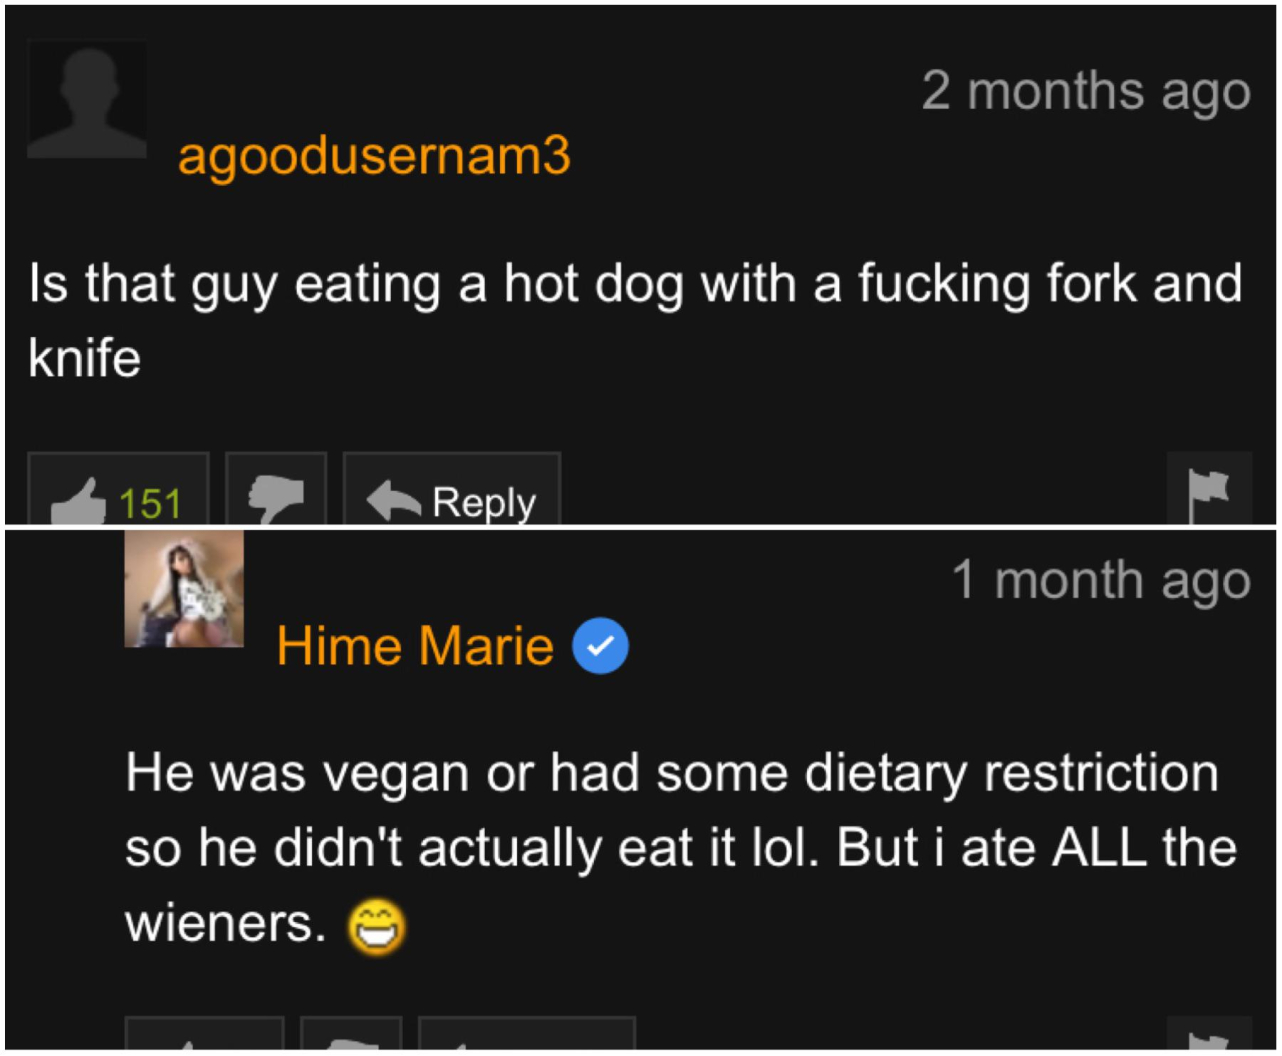 software - 2 months ago agoodusernam3 Is that guy eating a hot dog with a fucking fork and knife 151 1 month ago Hime Marie He was vegan or had some dietary restriction so he didn't actually eat it lol. But i ate All the wieners.